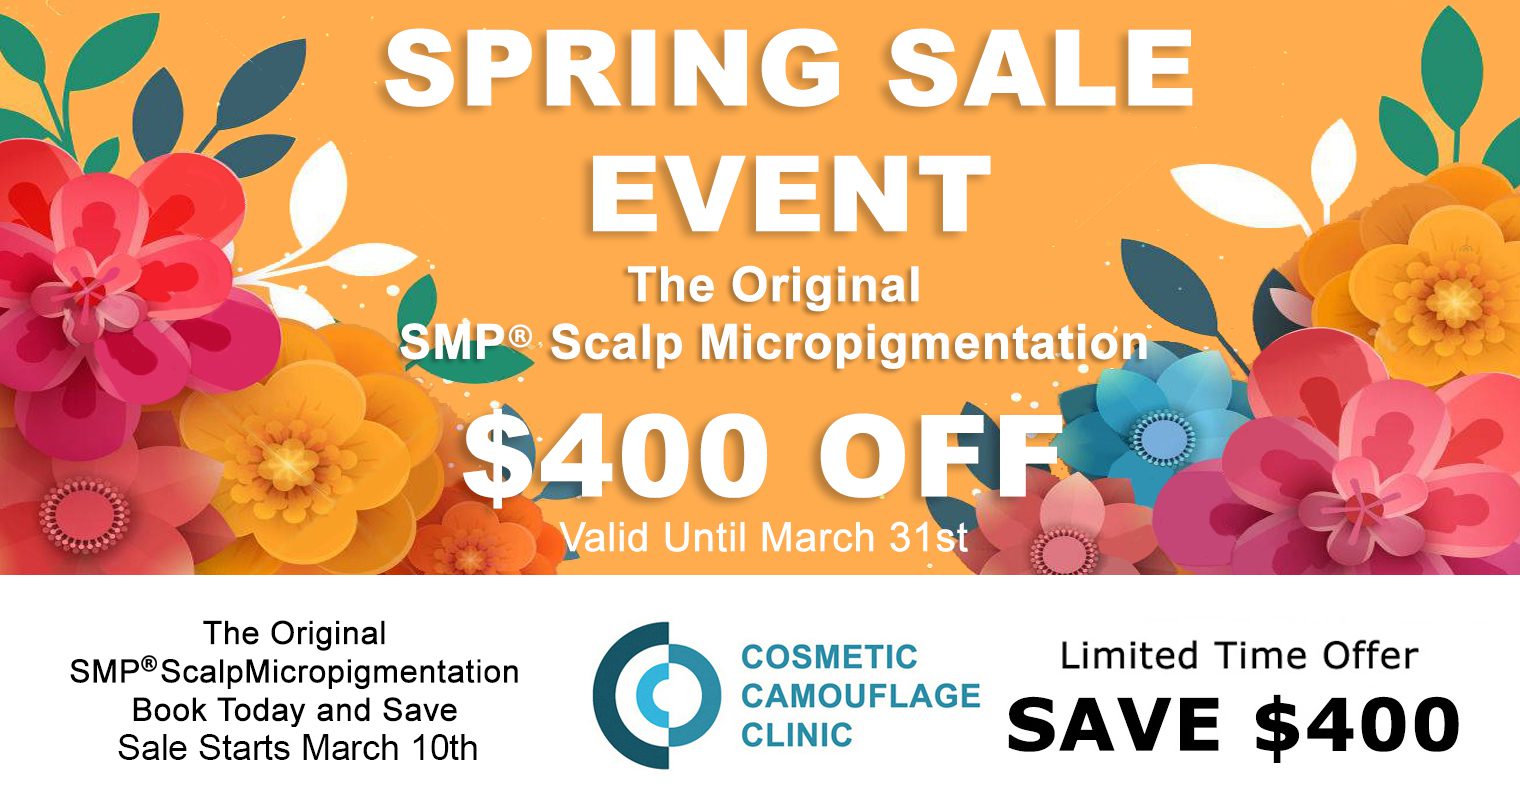 CosmeticCamouflage.com-March10-31